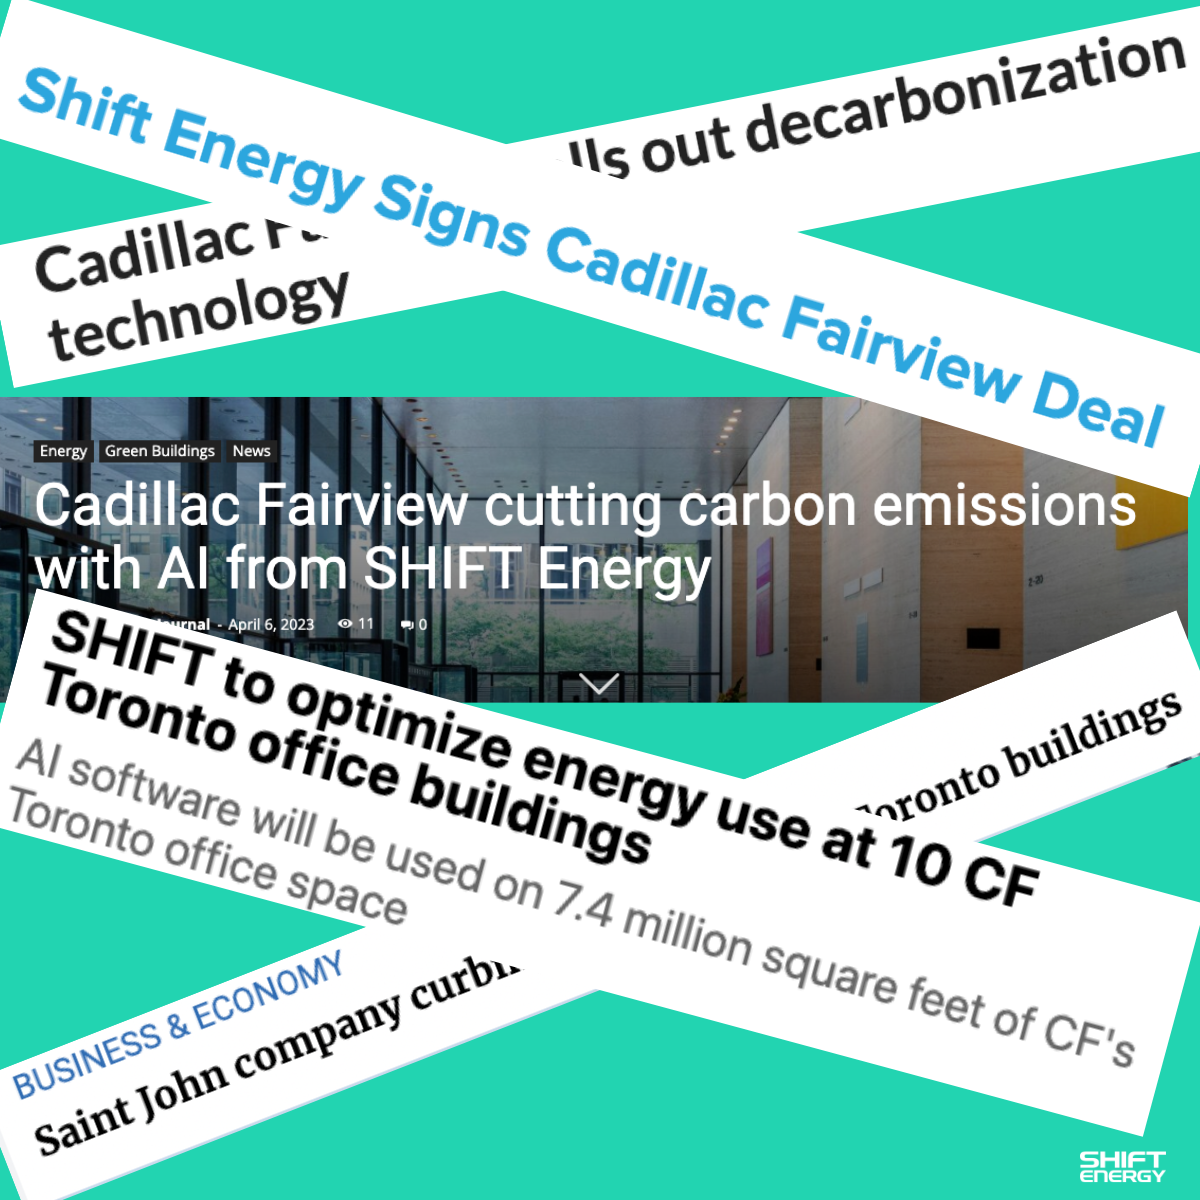 SHIFT Energy Helping Cadillac Fairview Build A More Sustainable Future